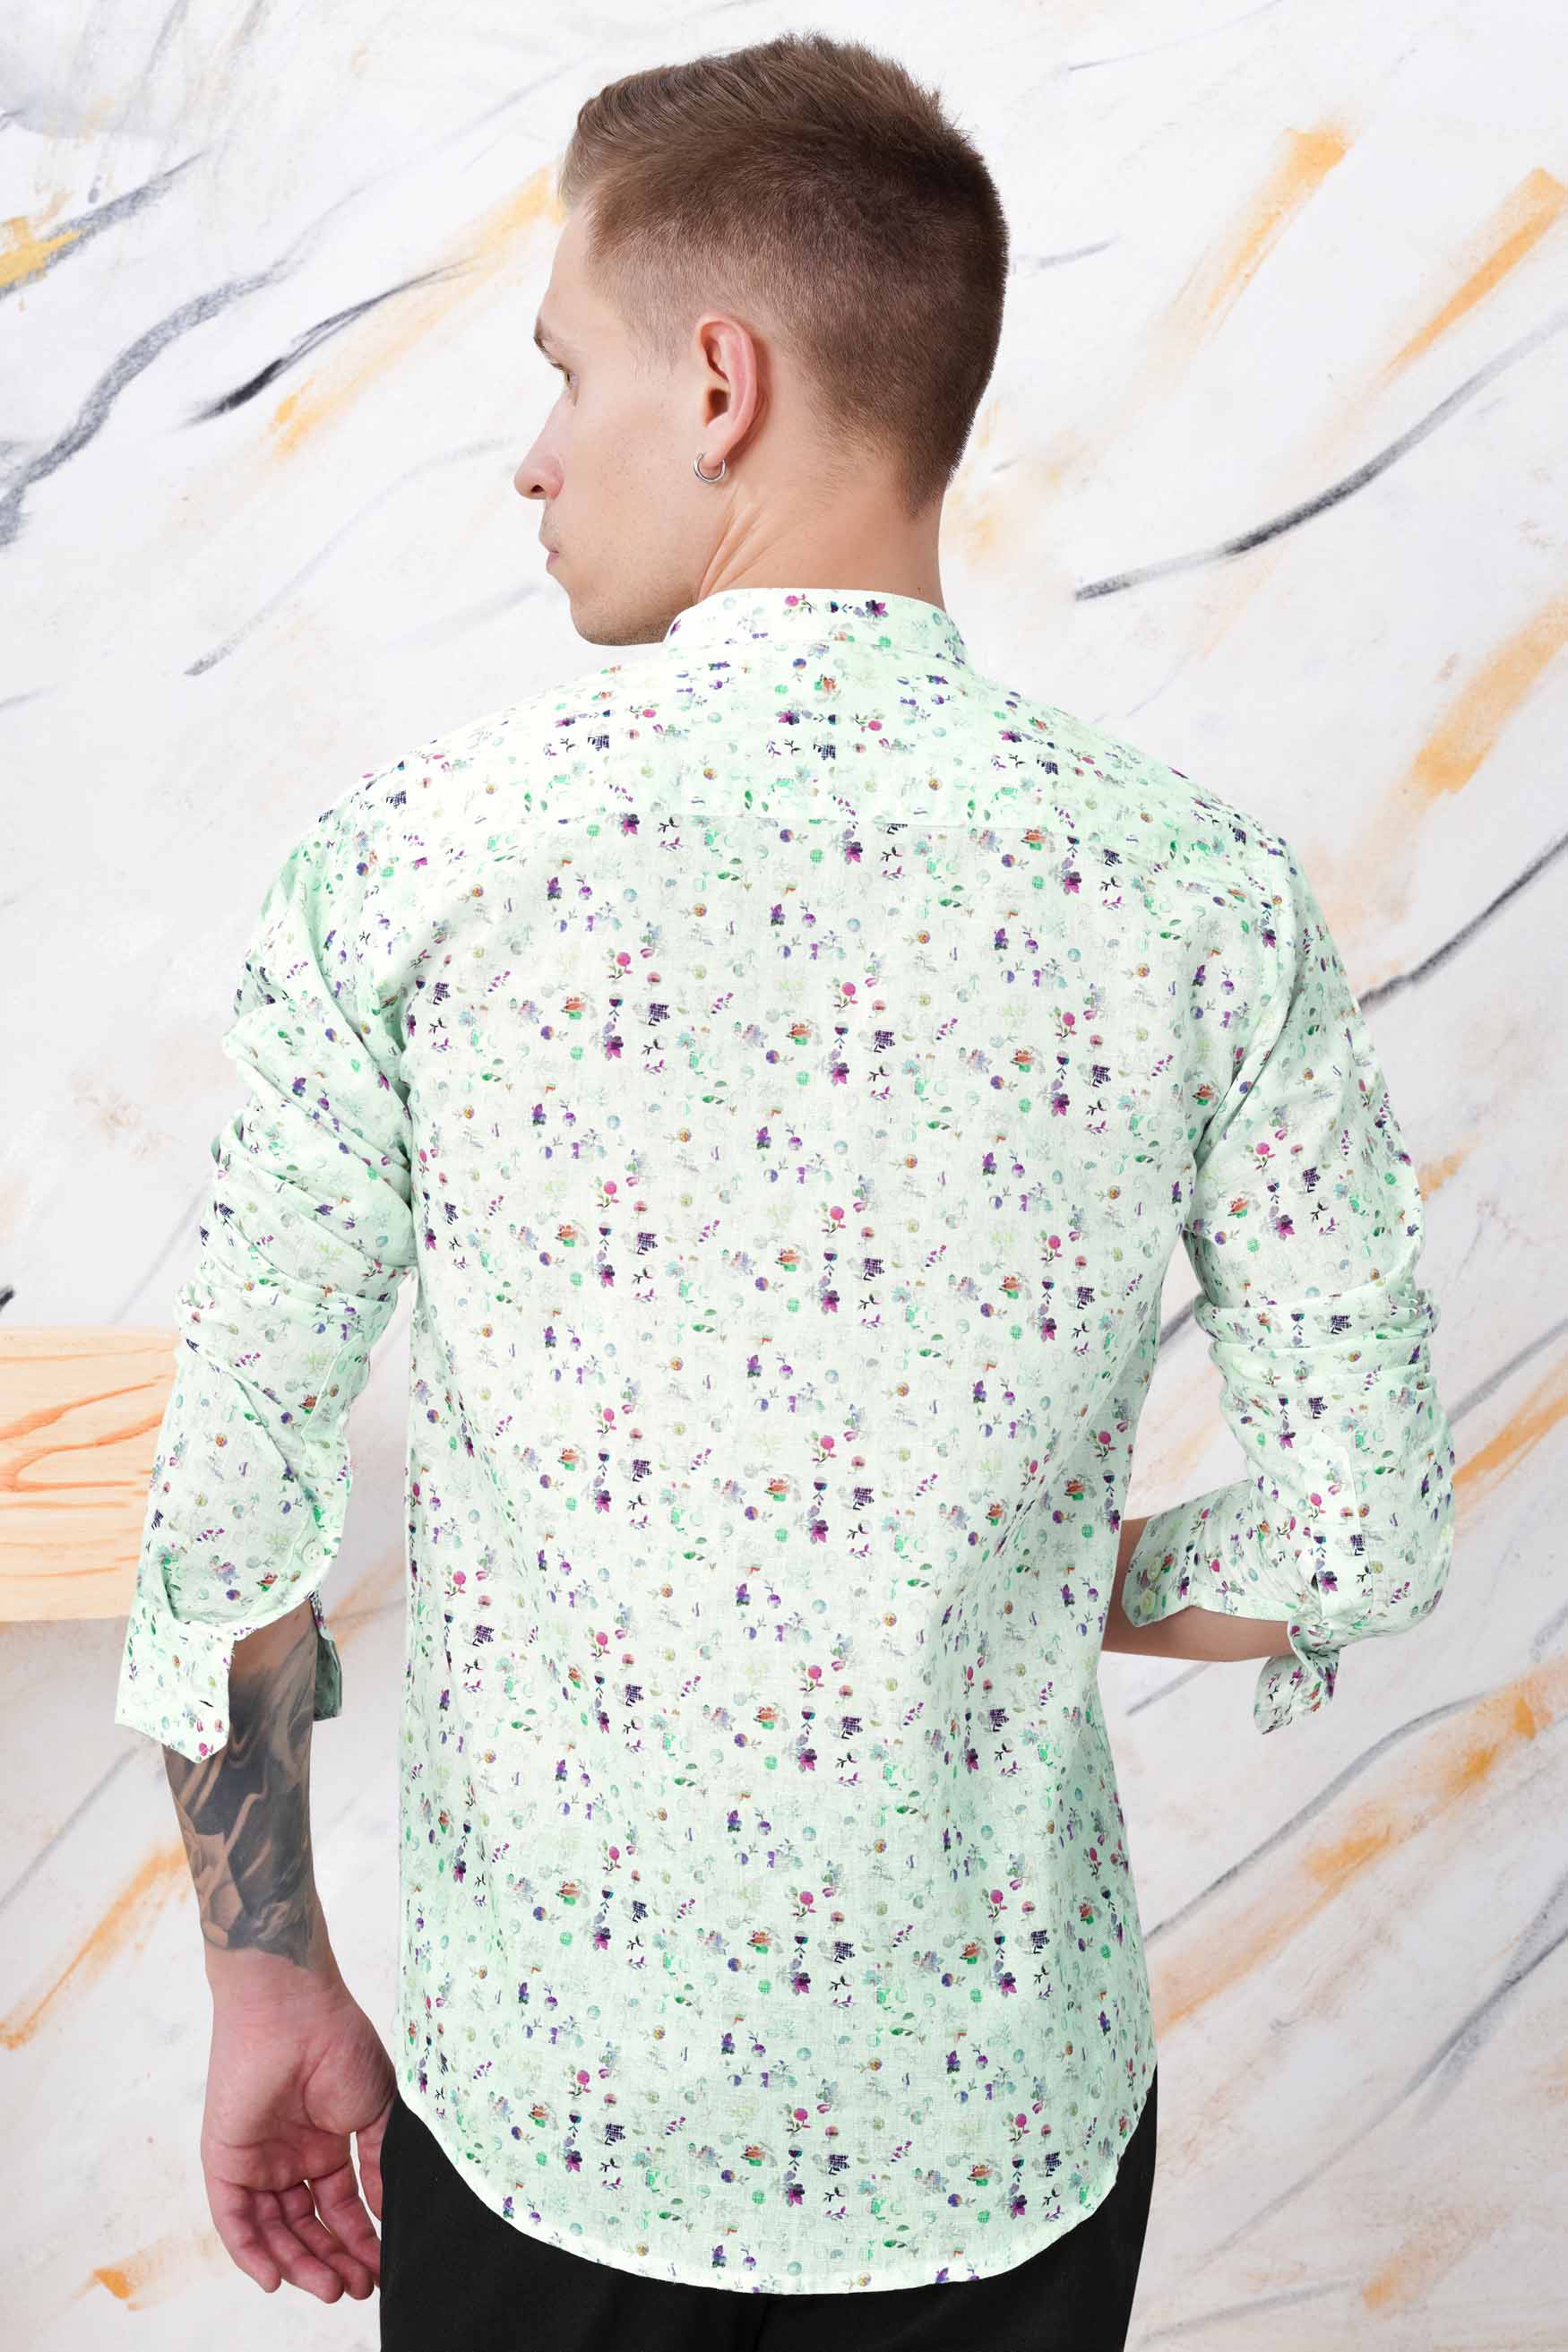 Surf Green with Multicolour Ditsy Printed Luxurious Linen Shirt 11579-BC-38, 11579-BC-H-38, 11579-BC-39, 11579-BC-H-39, 11579-BC-40, 11579-BC-H-40, 11579-BC-42, 11579-BC-H-42, 11579-BC-44, 11579-BC-H-44, 11579-BC-46, 11579-BC-H-46, 11579-BC-48, 11579-BC-H-48, 11579-BC-50, 11579-BC-H-50, 11579-BC-52, 11579-BC-H-52